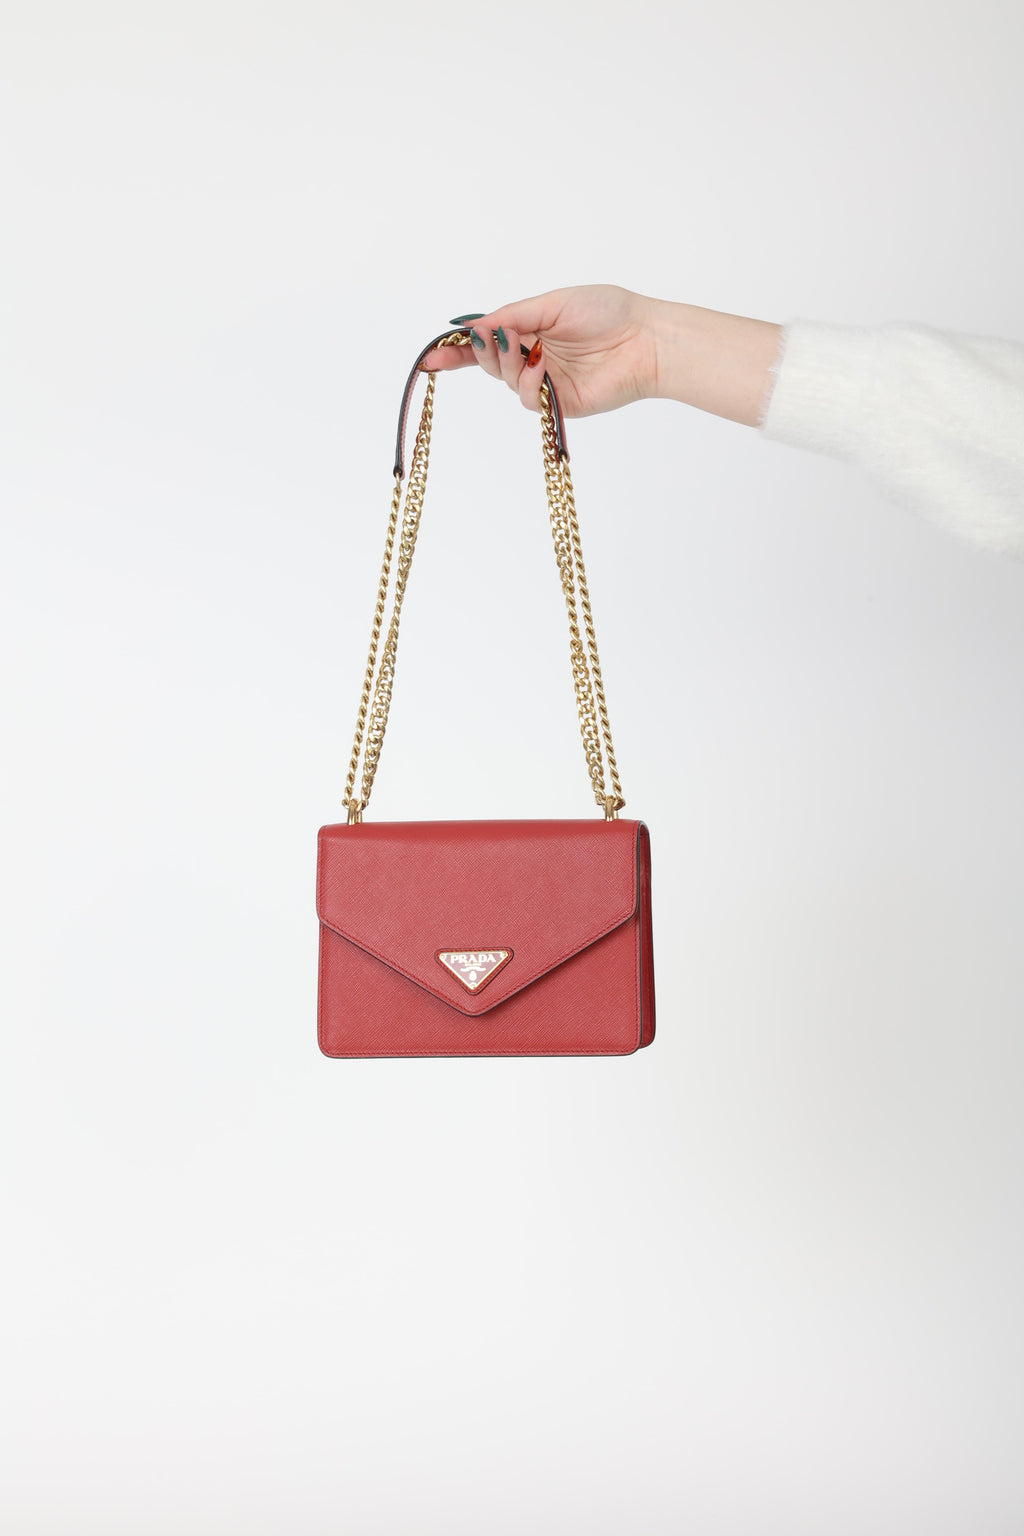 Shopping Designer Bags and Scoring Cyber Sales on  — Live Love Blank